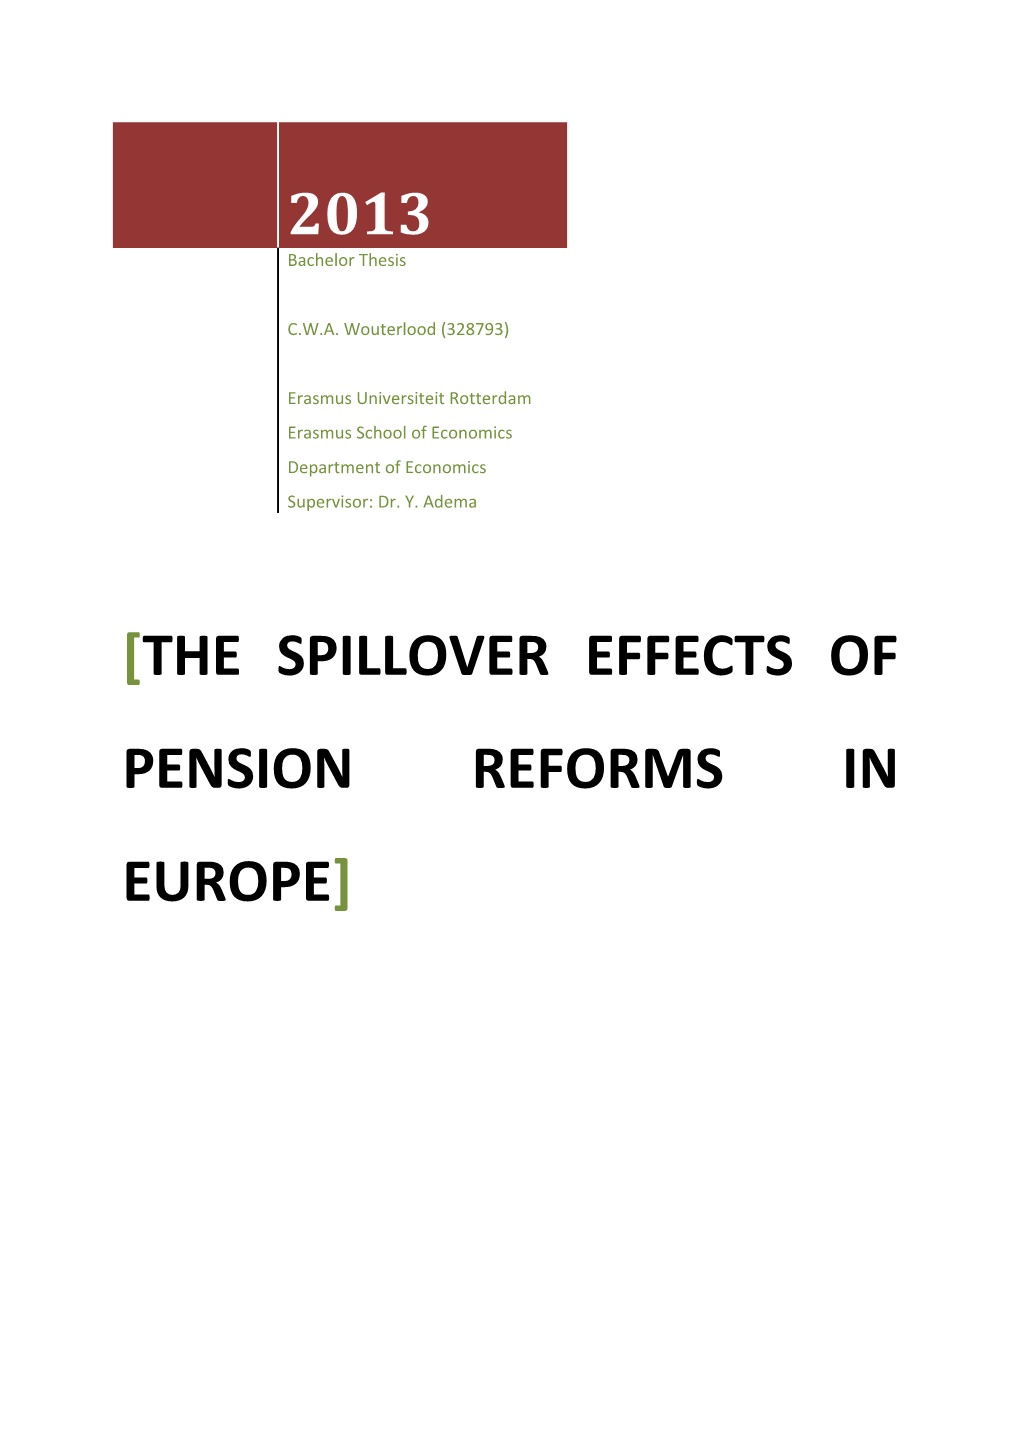 The SPILLOVER EFFECTS of PENSION REFORMS in EUROPE